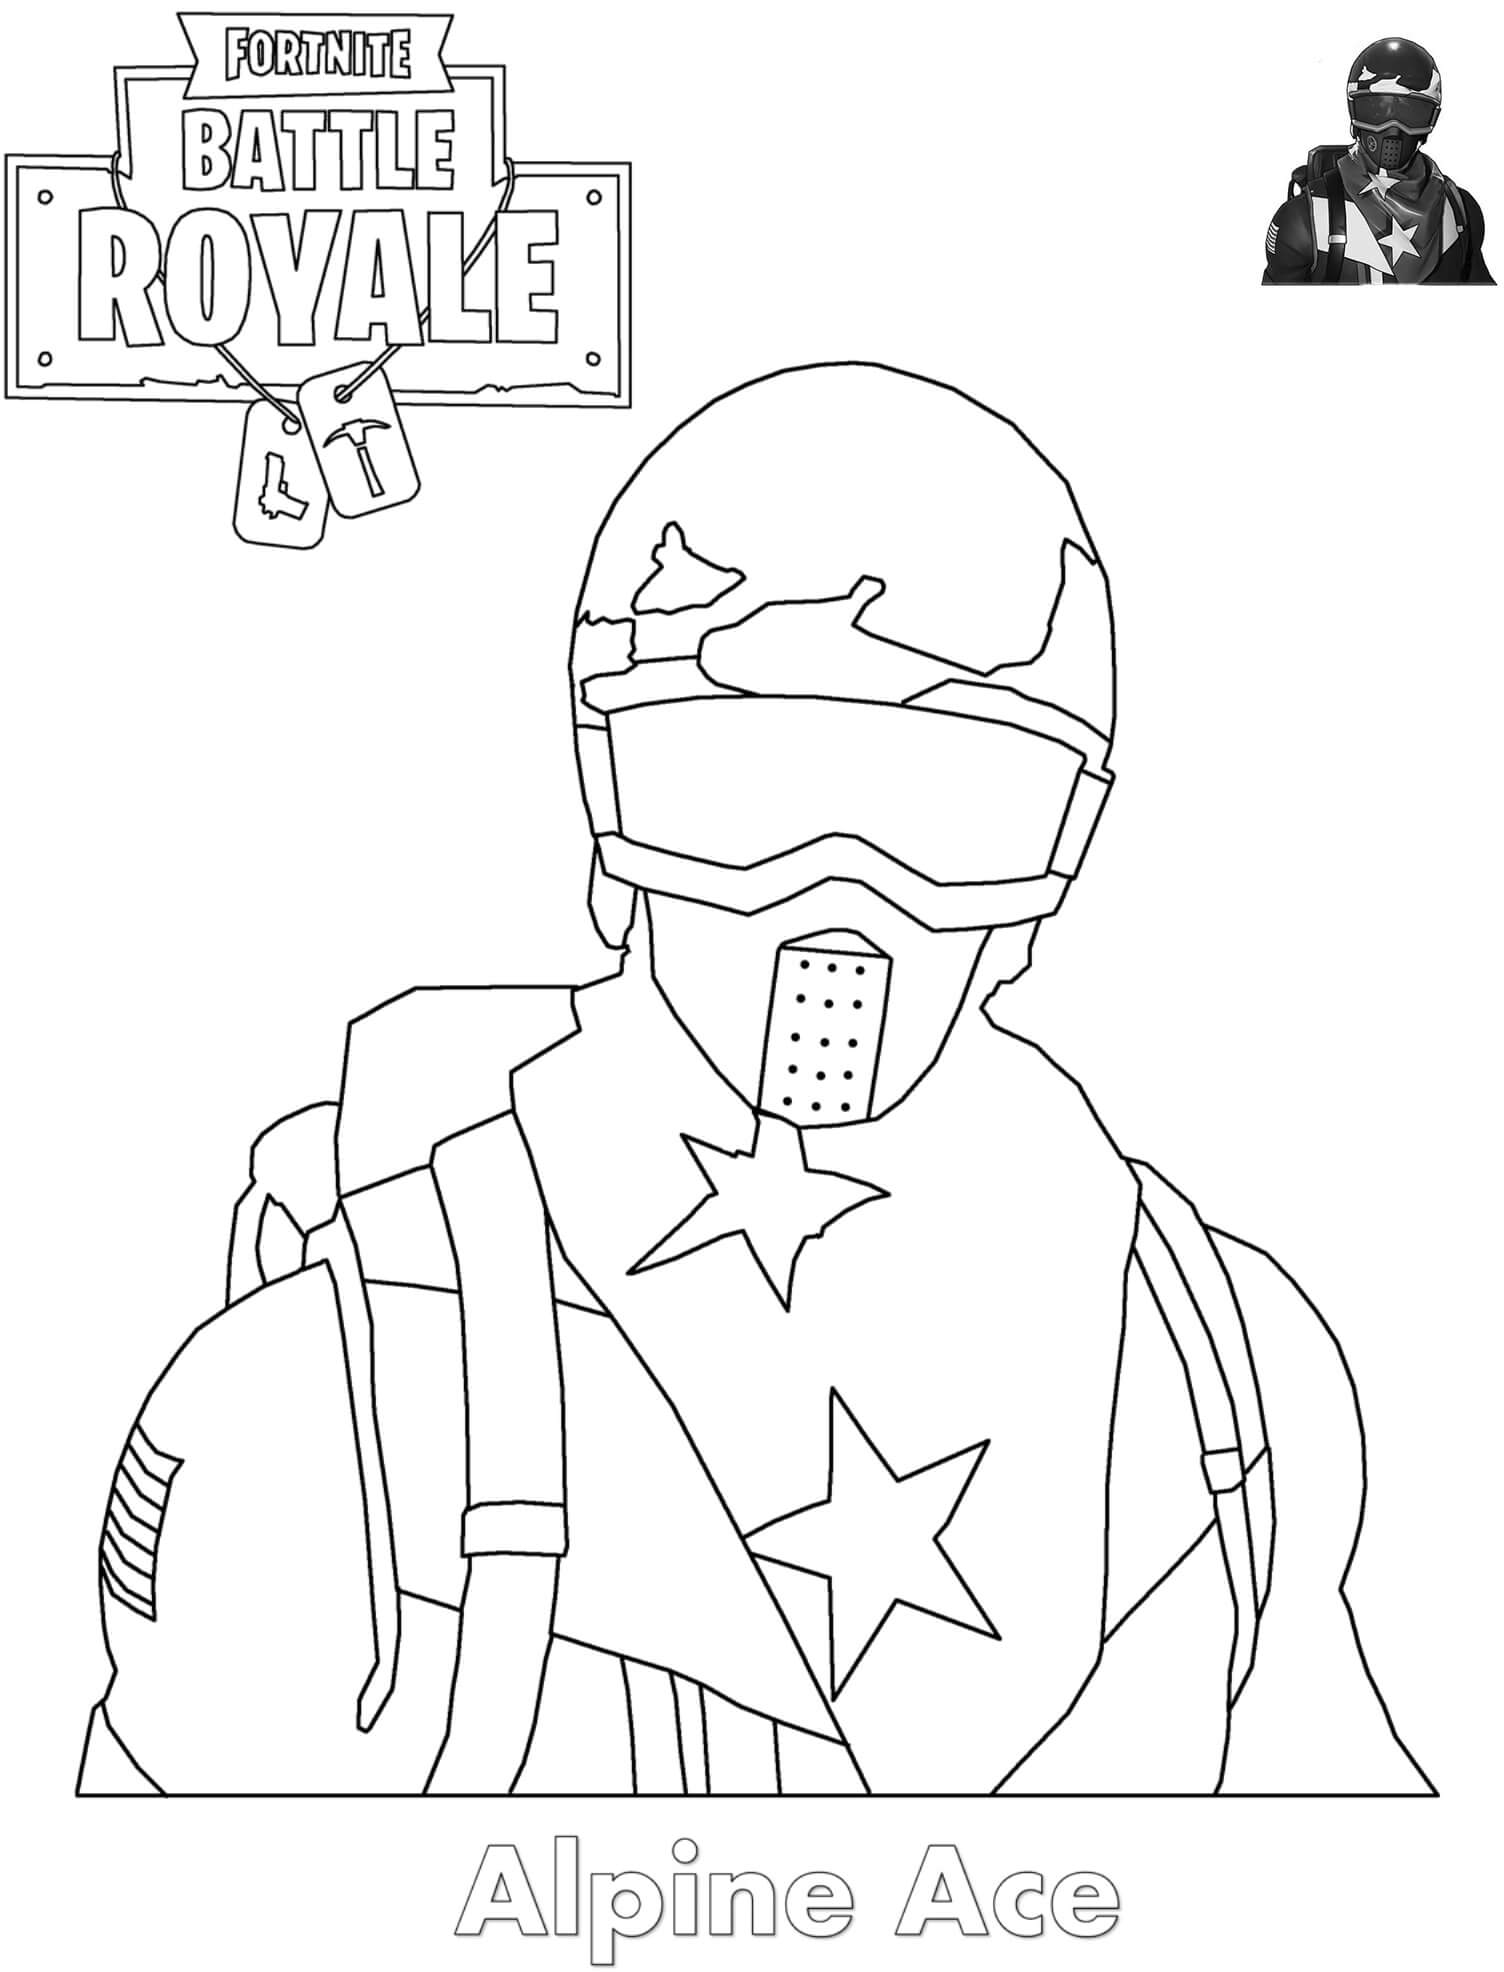 Alpine Ace Skin Fortnite Coloring Page